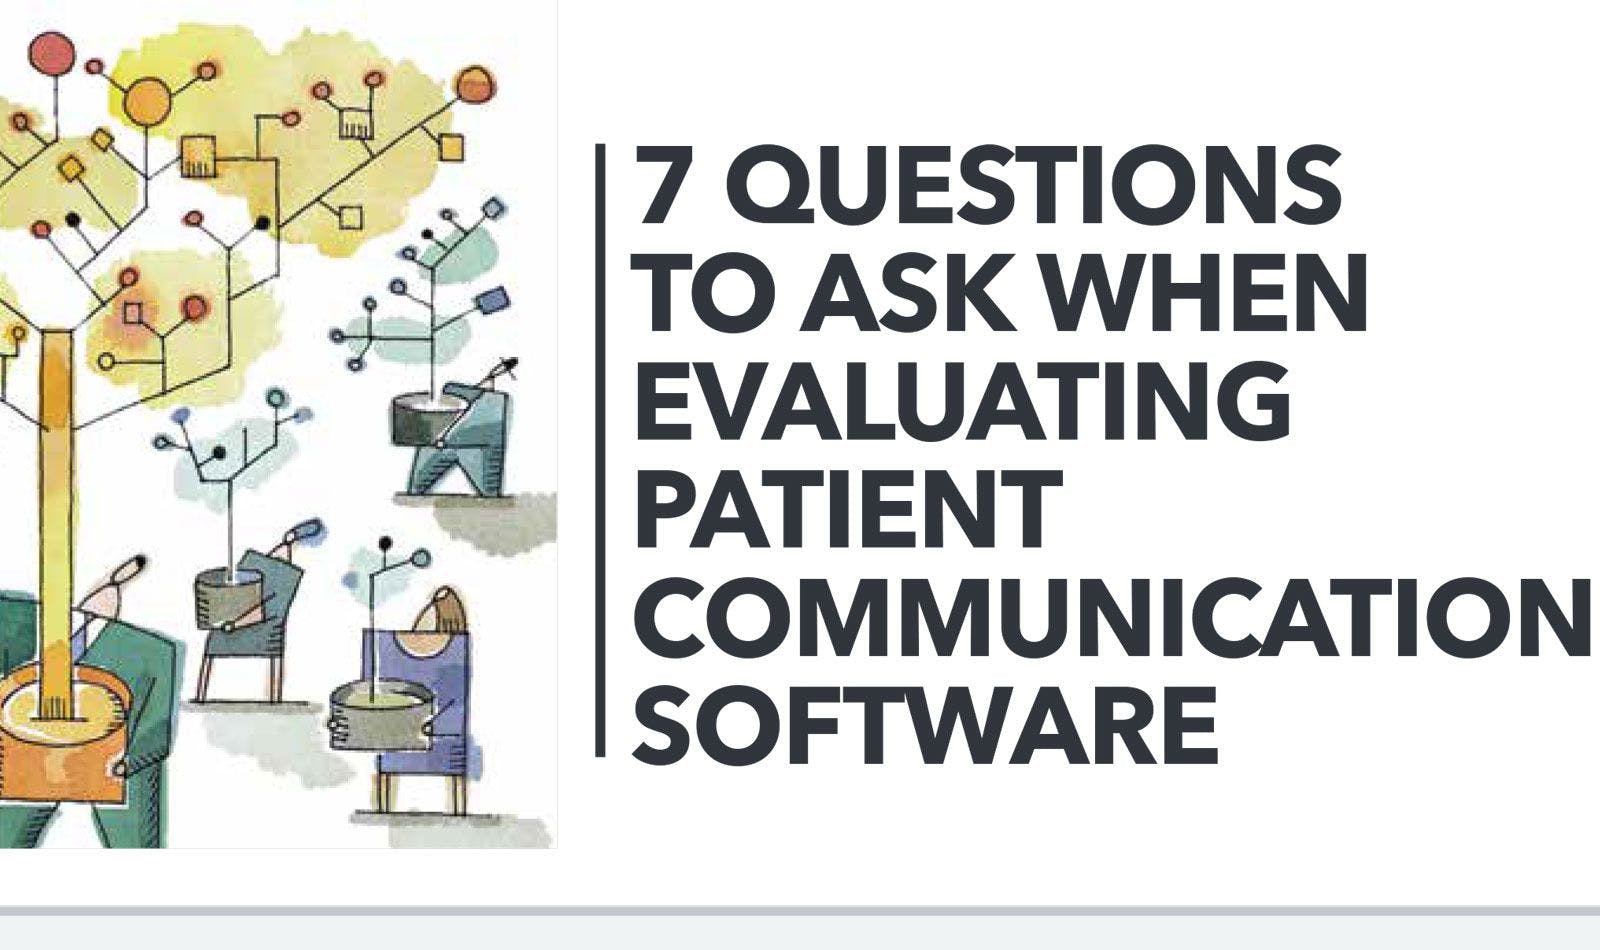 7 Questions to Ask When Evaluating Patient Communication Software